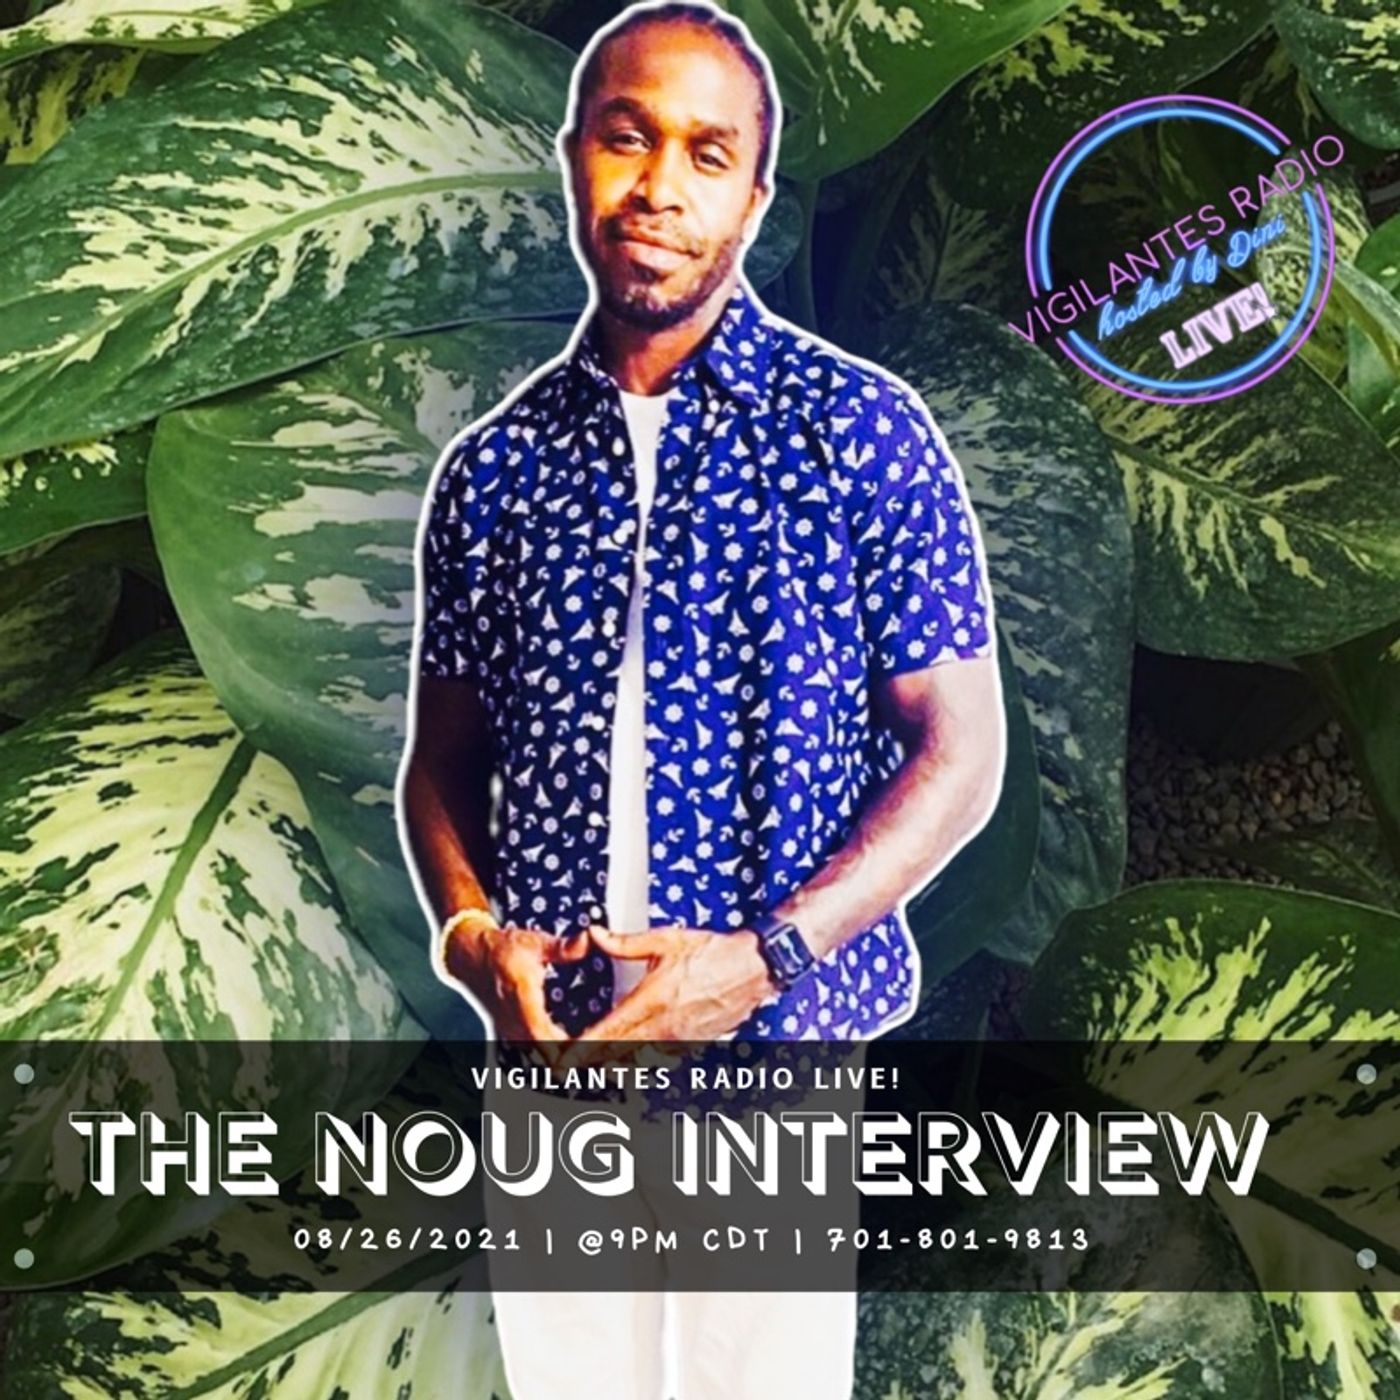 The Noug Interview. Image